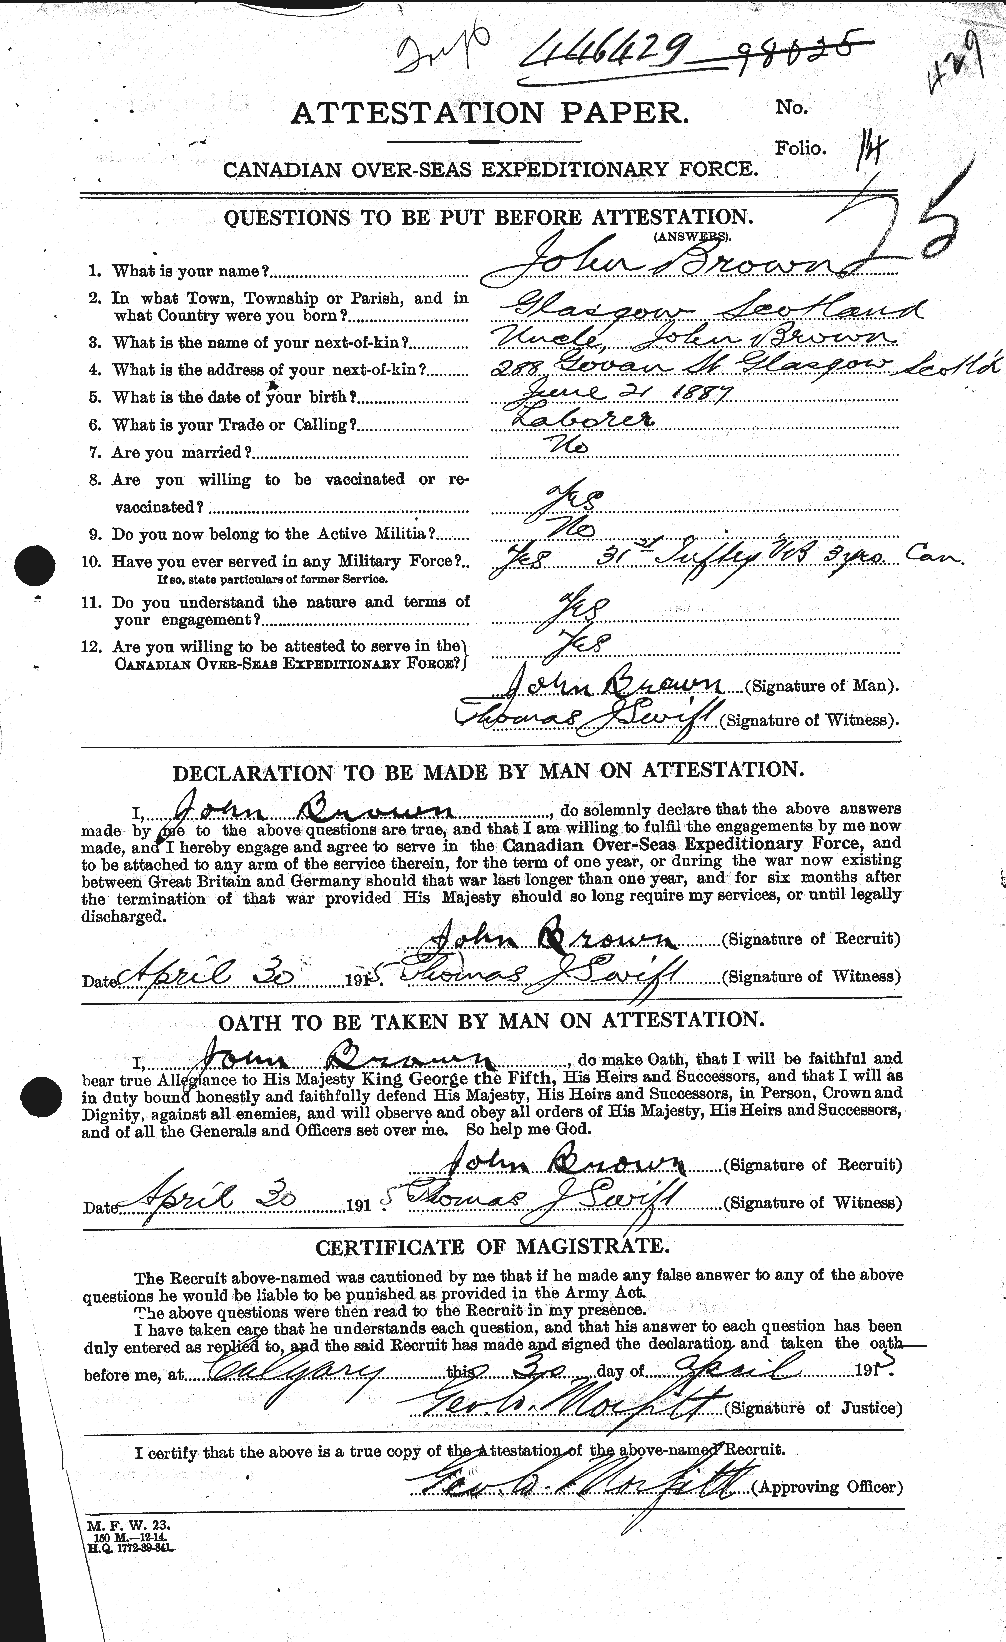 Personnel Records of the First World War - CEF 264537a